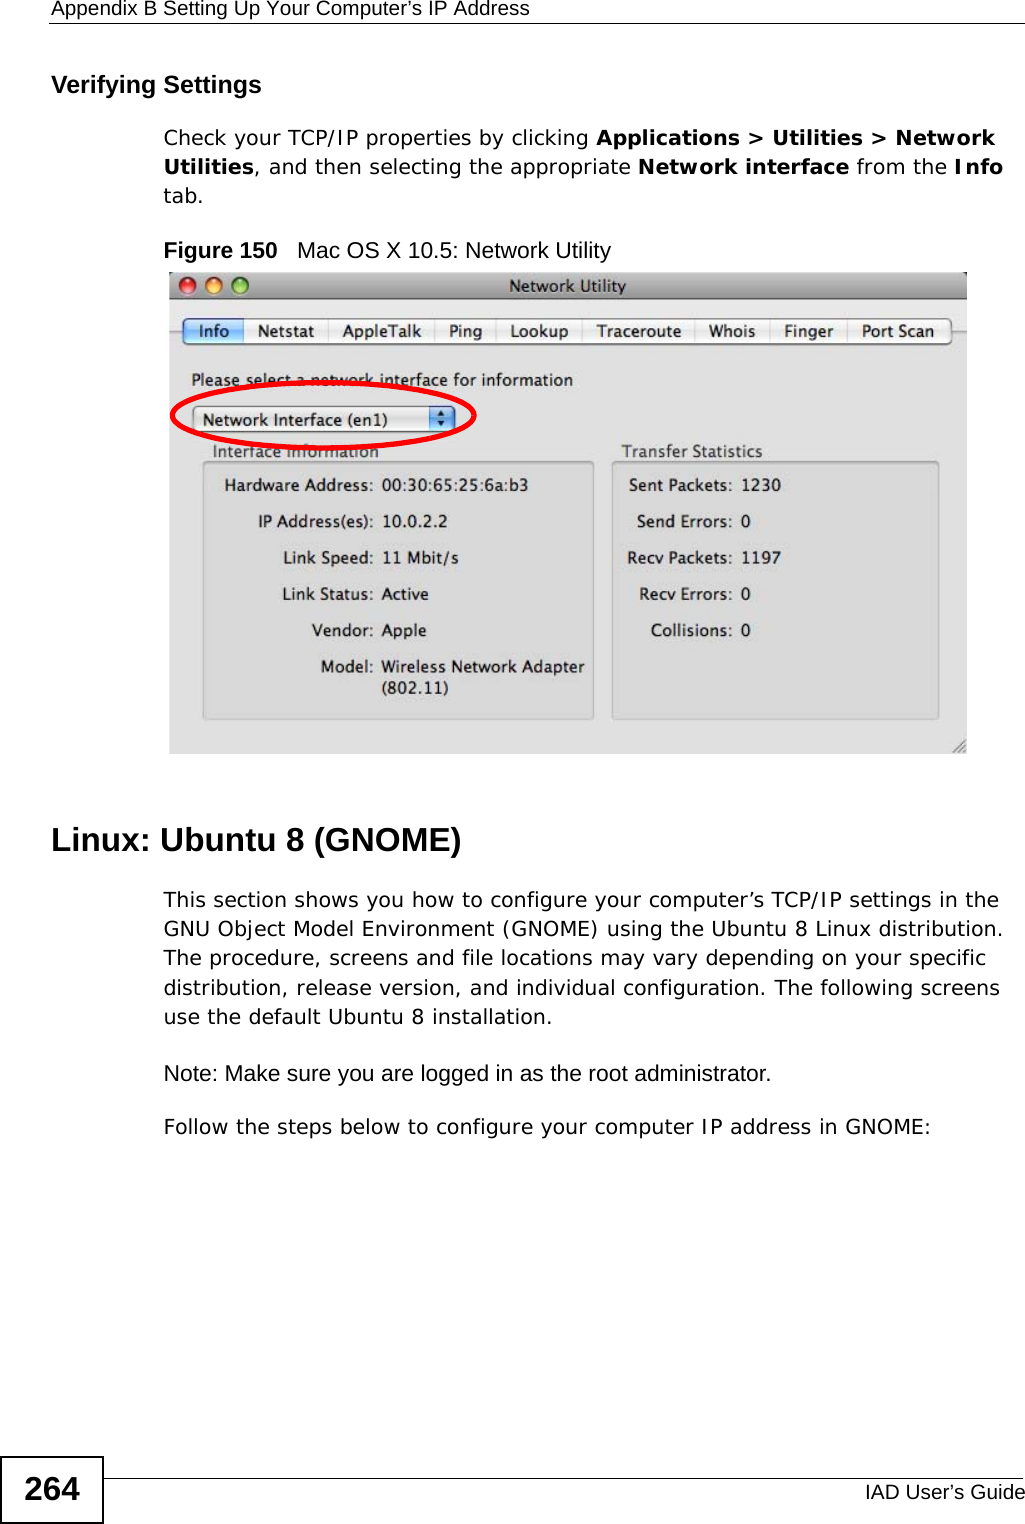 Appendix B Setting Up Your Computer’s IP AddressIAD User’s Guide264Verifying SettingsCheck your TCP/IP properties by clicking Applications &gt; Utilities &gt; Network Utilities, and then selecting the appropriate Network interface from the Info tab.Figure 150   Mac OS X 10.5: Network UtilityLinux: Ubuntu 8 (GNOME)This section shows you how to configure your computer’s TCP/IP settings in the GNU Object Model Environment (GNOME) using the Ubuntu 8 Linux distribution. The procedure, screens and file locations may vary depending on your specific distribution, release version, and individual configuration. The following screens use the default Ubuntu 8 installation.Note: Make sure you are logged in as the root administrator. Follow the steps below to configure your computer IP address in GNOME: 